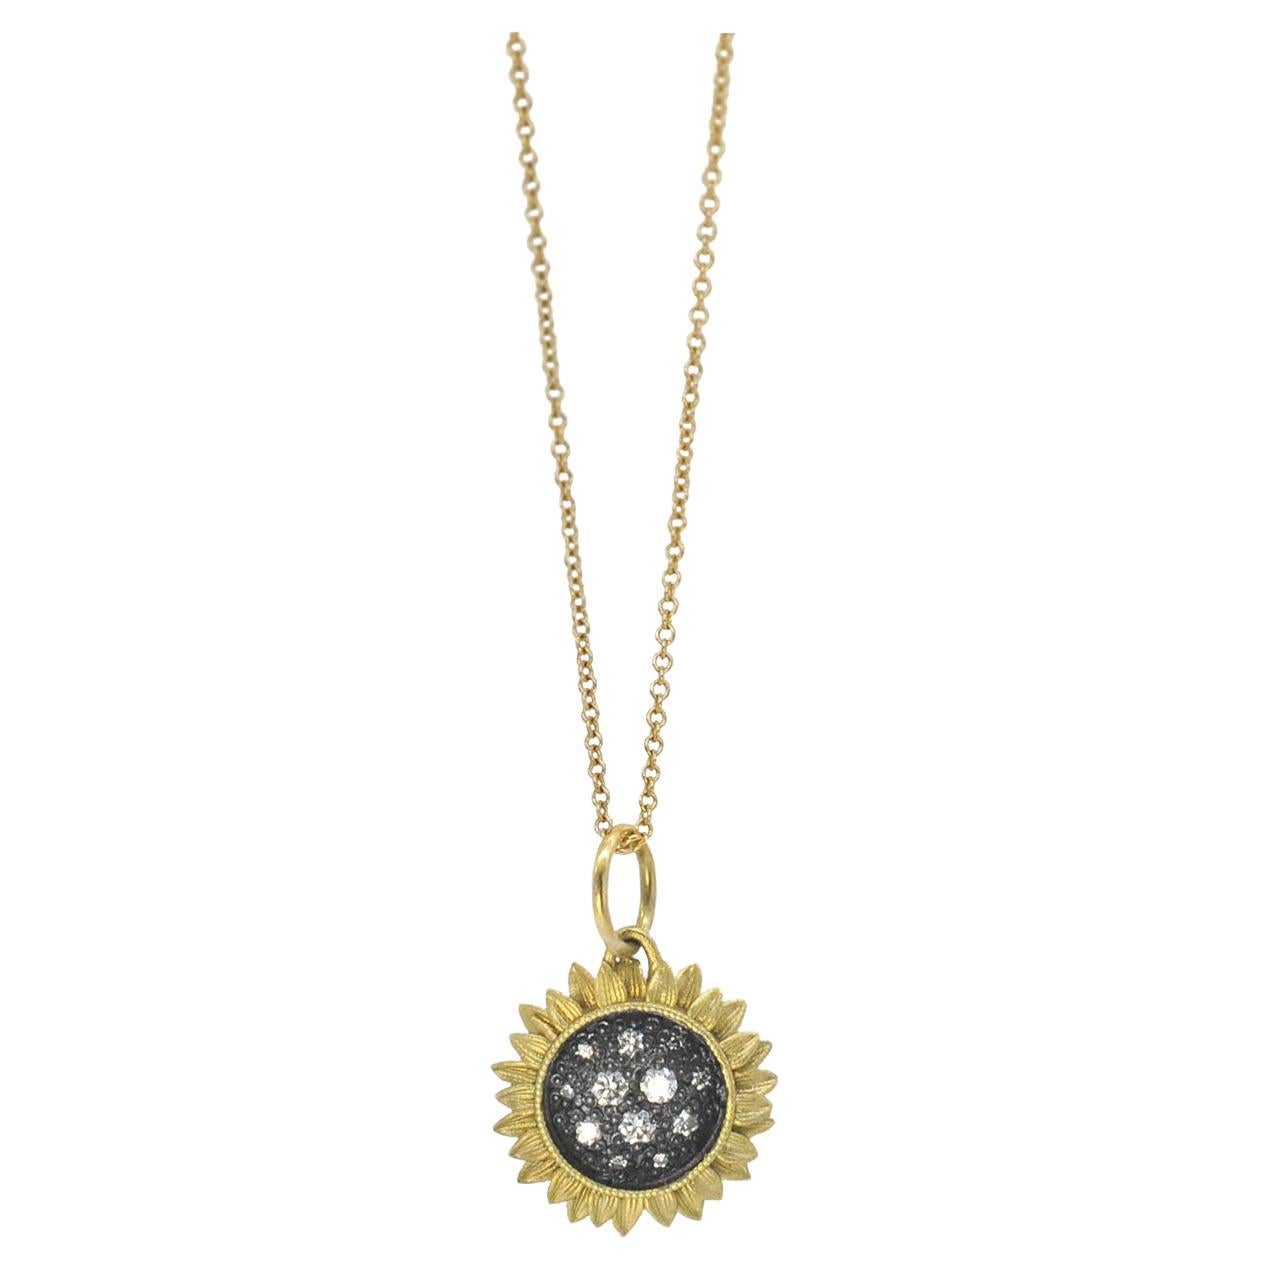 Sunflower Necklace with Pave Set Diamonds in Oxidized Silver, Tiny